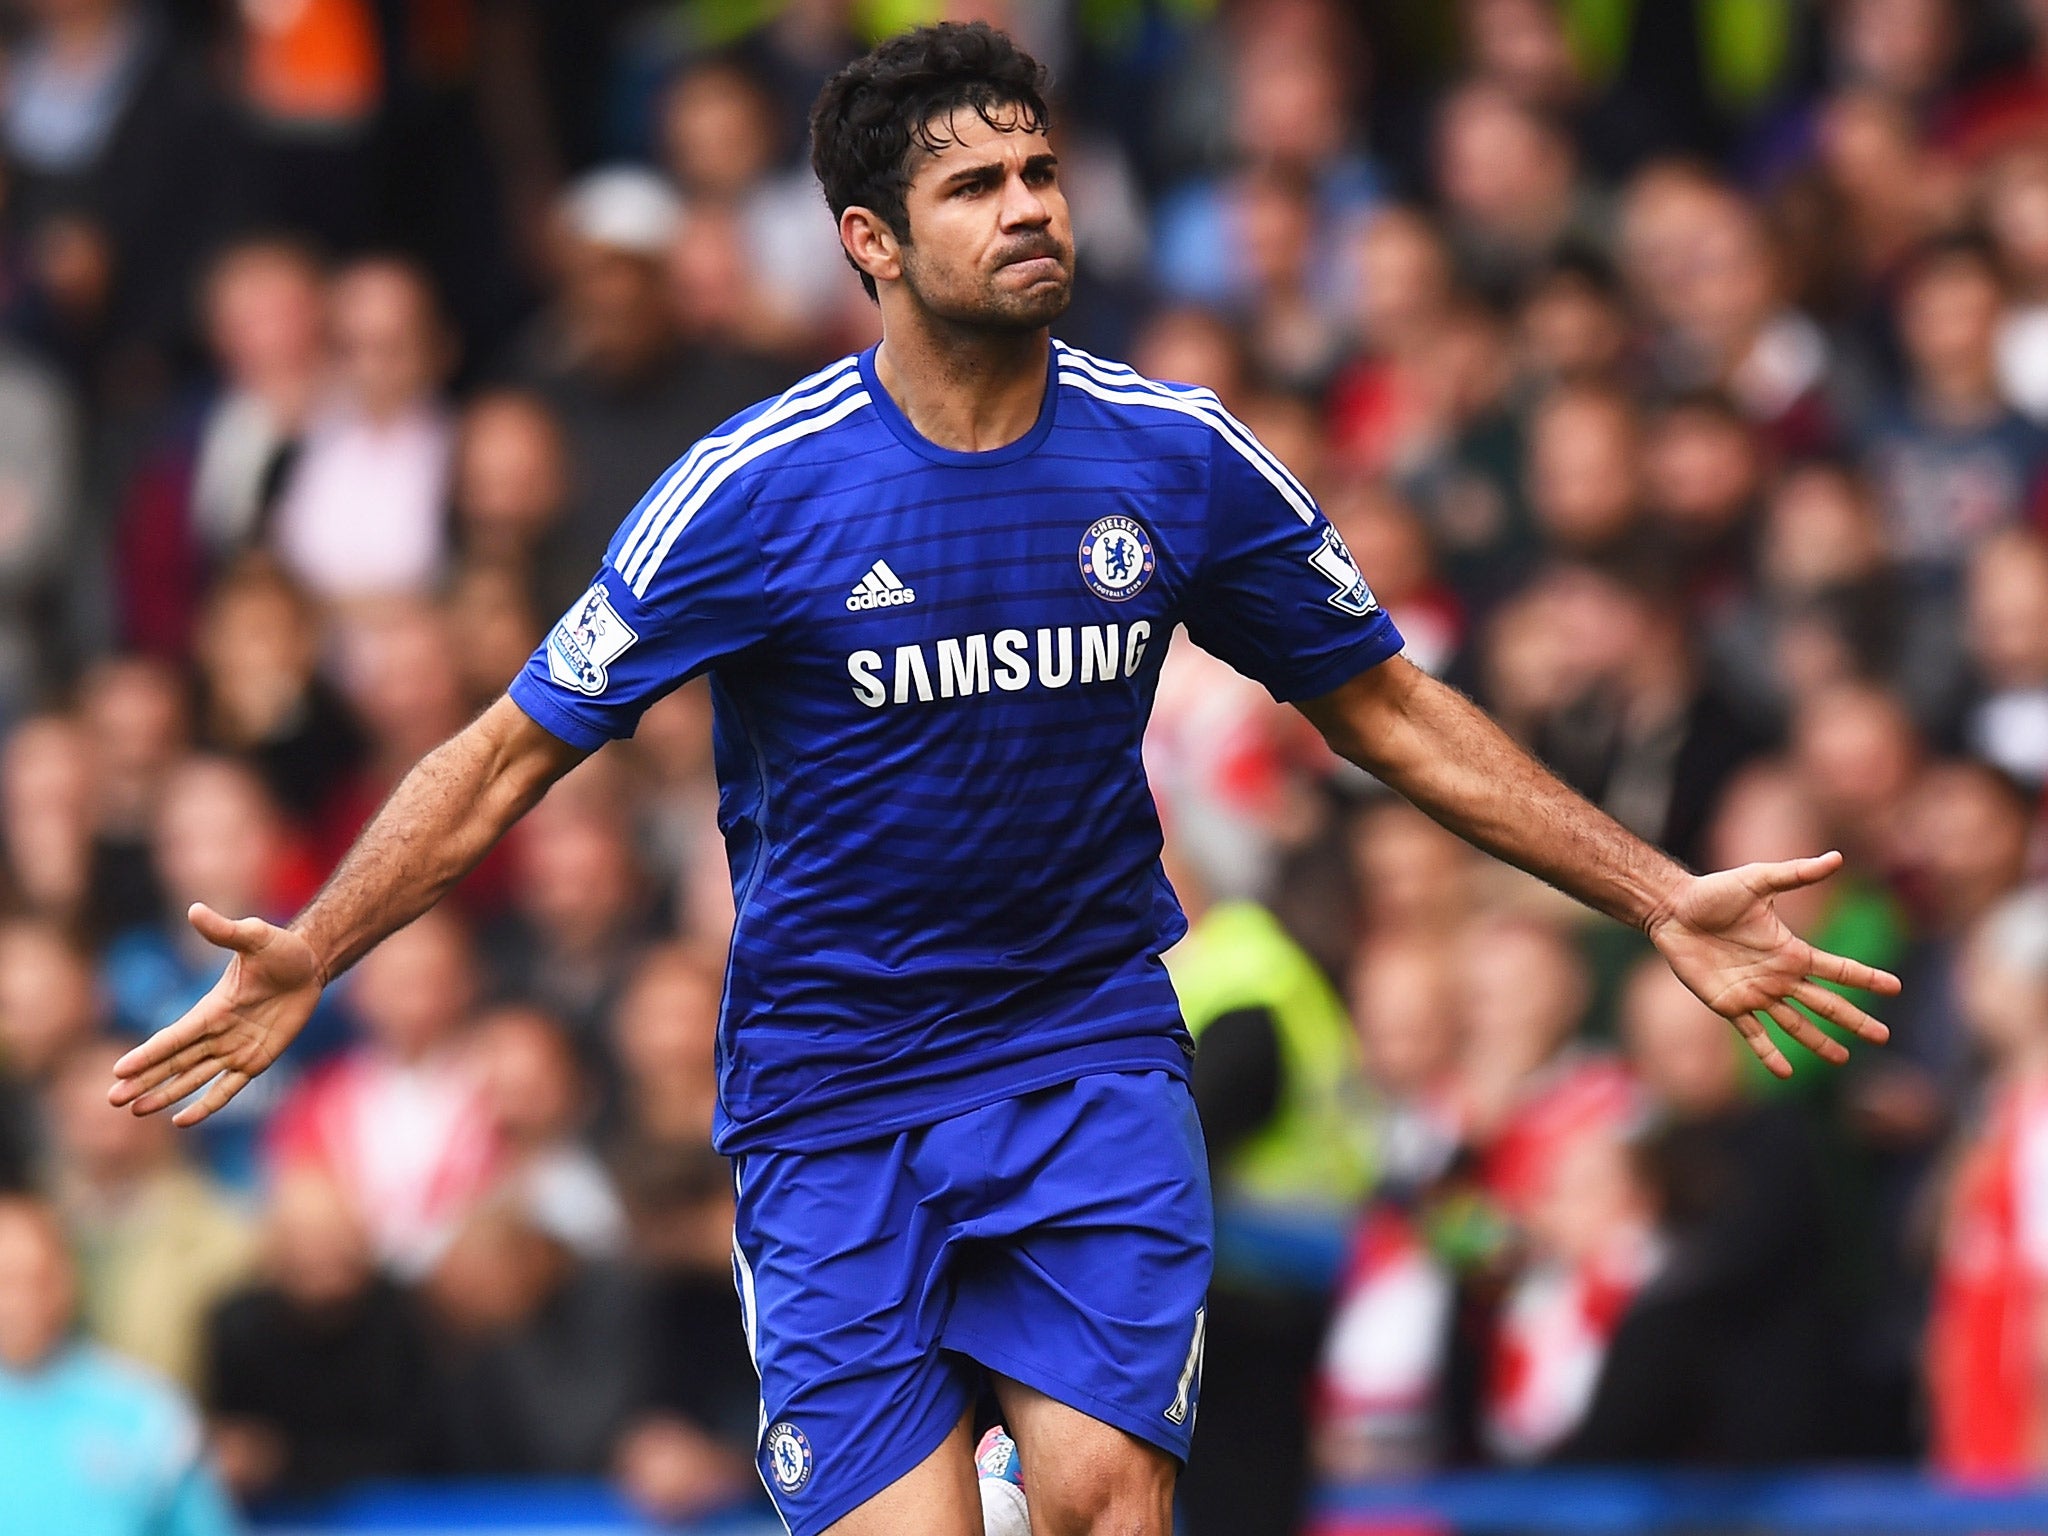 Costa netted 20 goals in just 26 appearances in his first Premier League season (Getty)